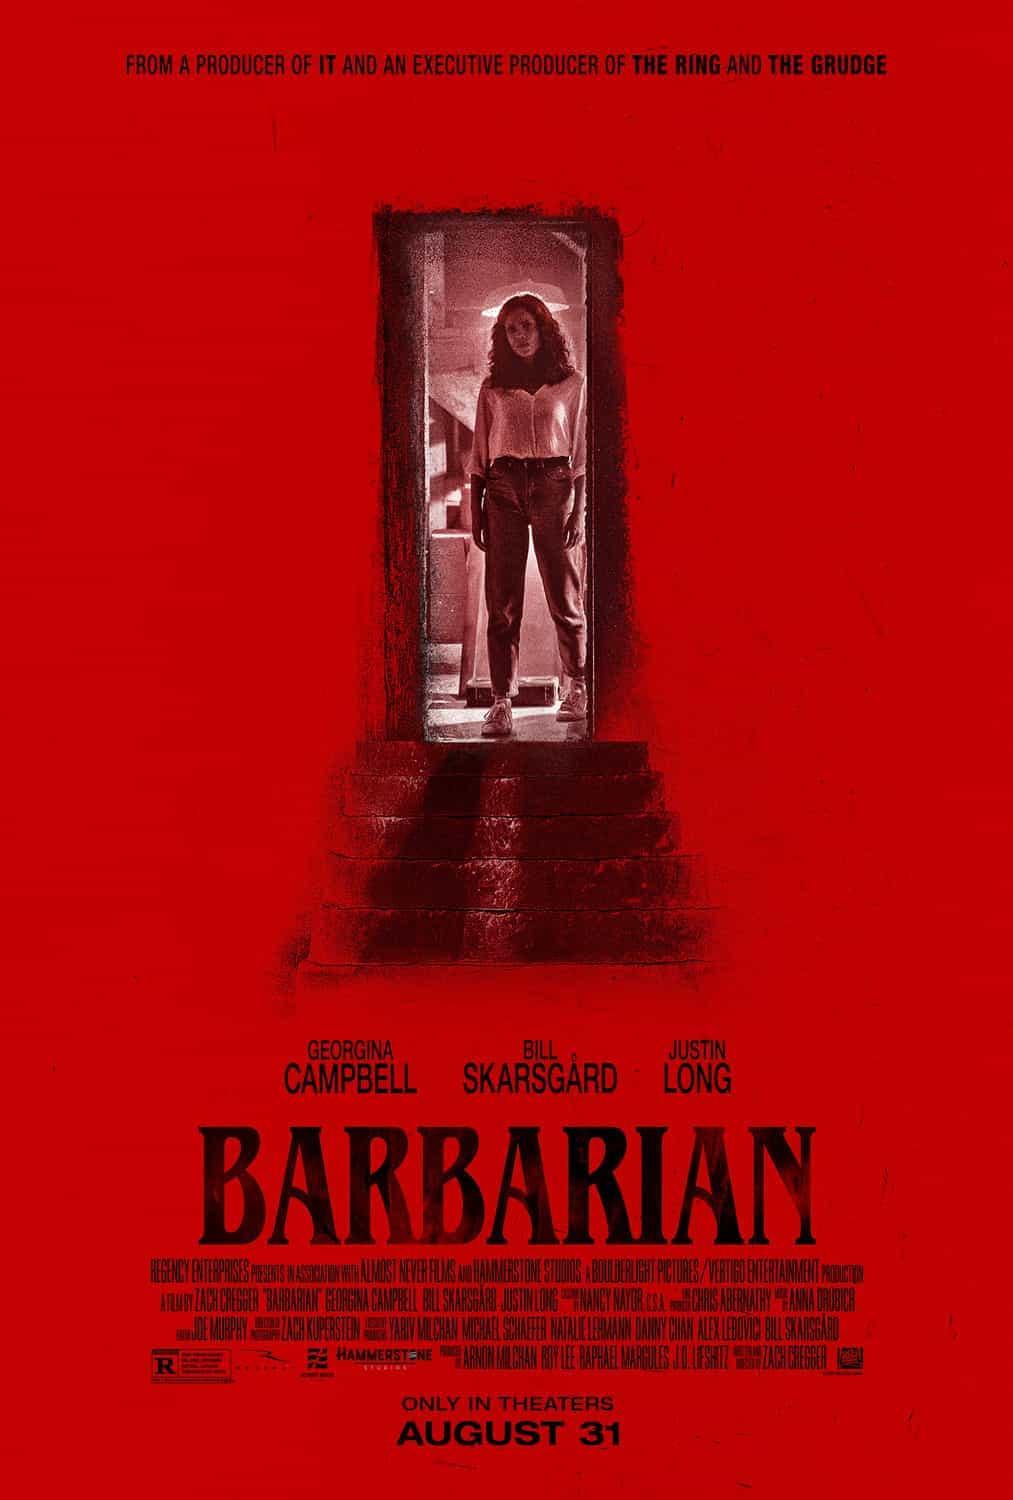 US Box Office Weekend Report 9th - 11th September 2022: Barbarian is the new North American number 1 movie on its debut